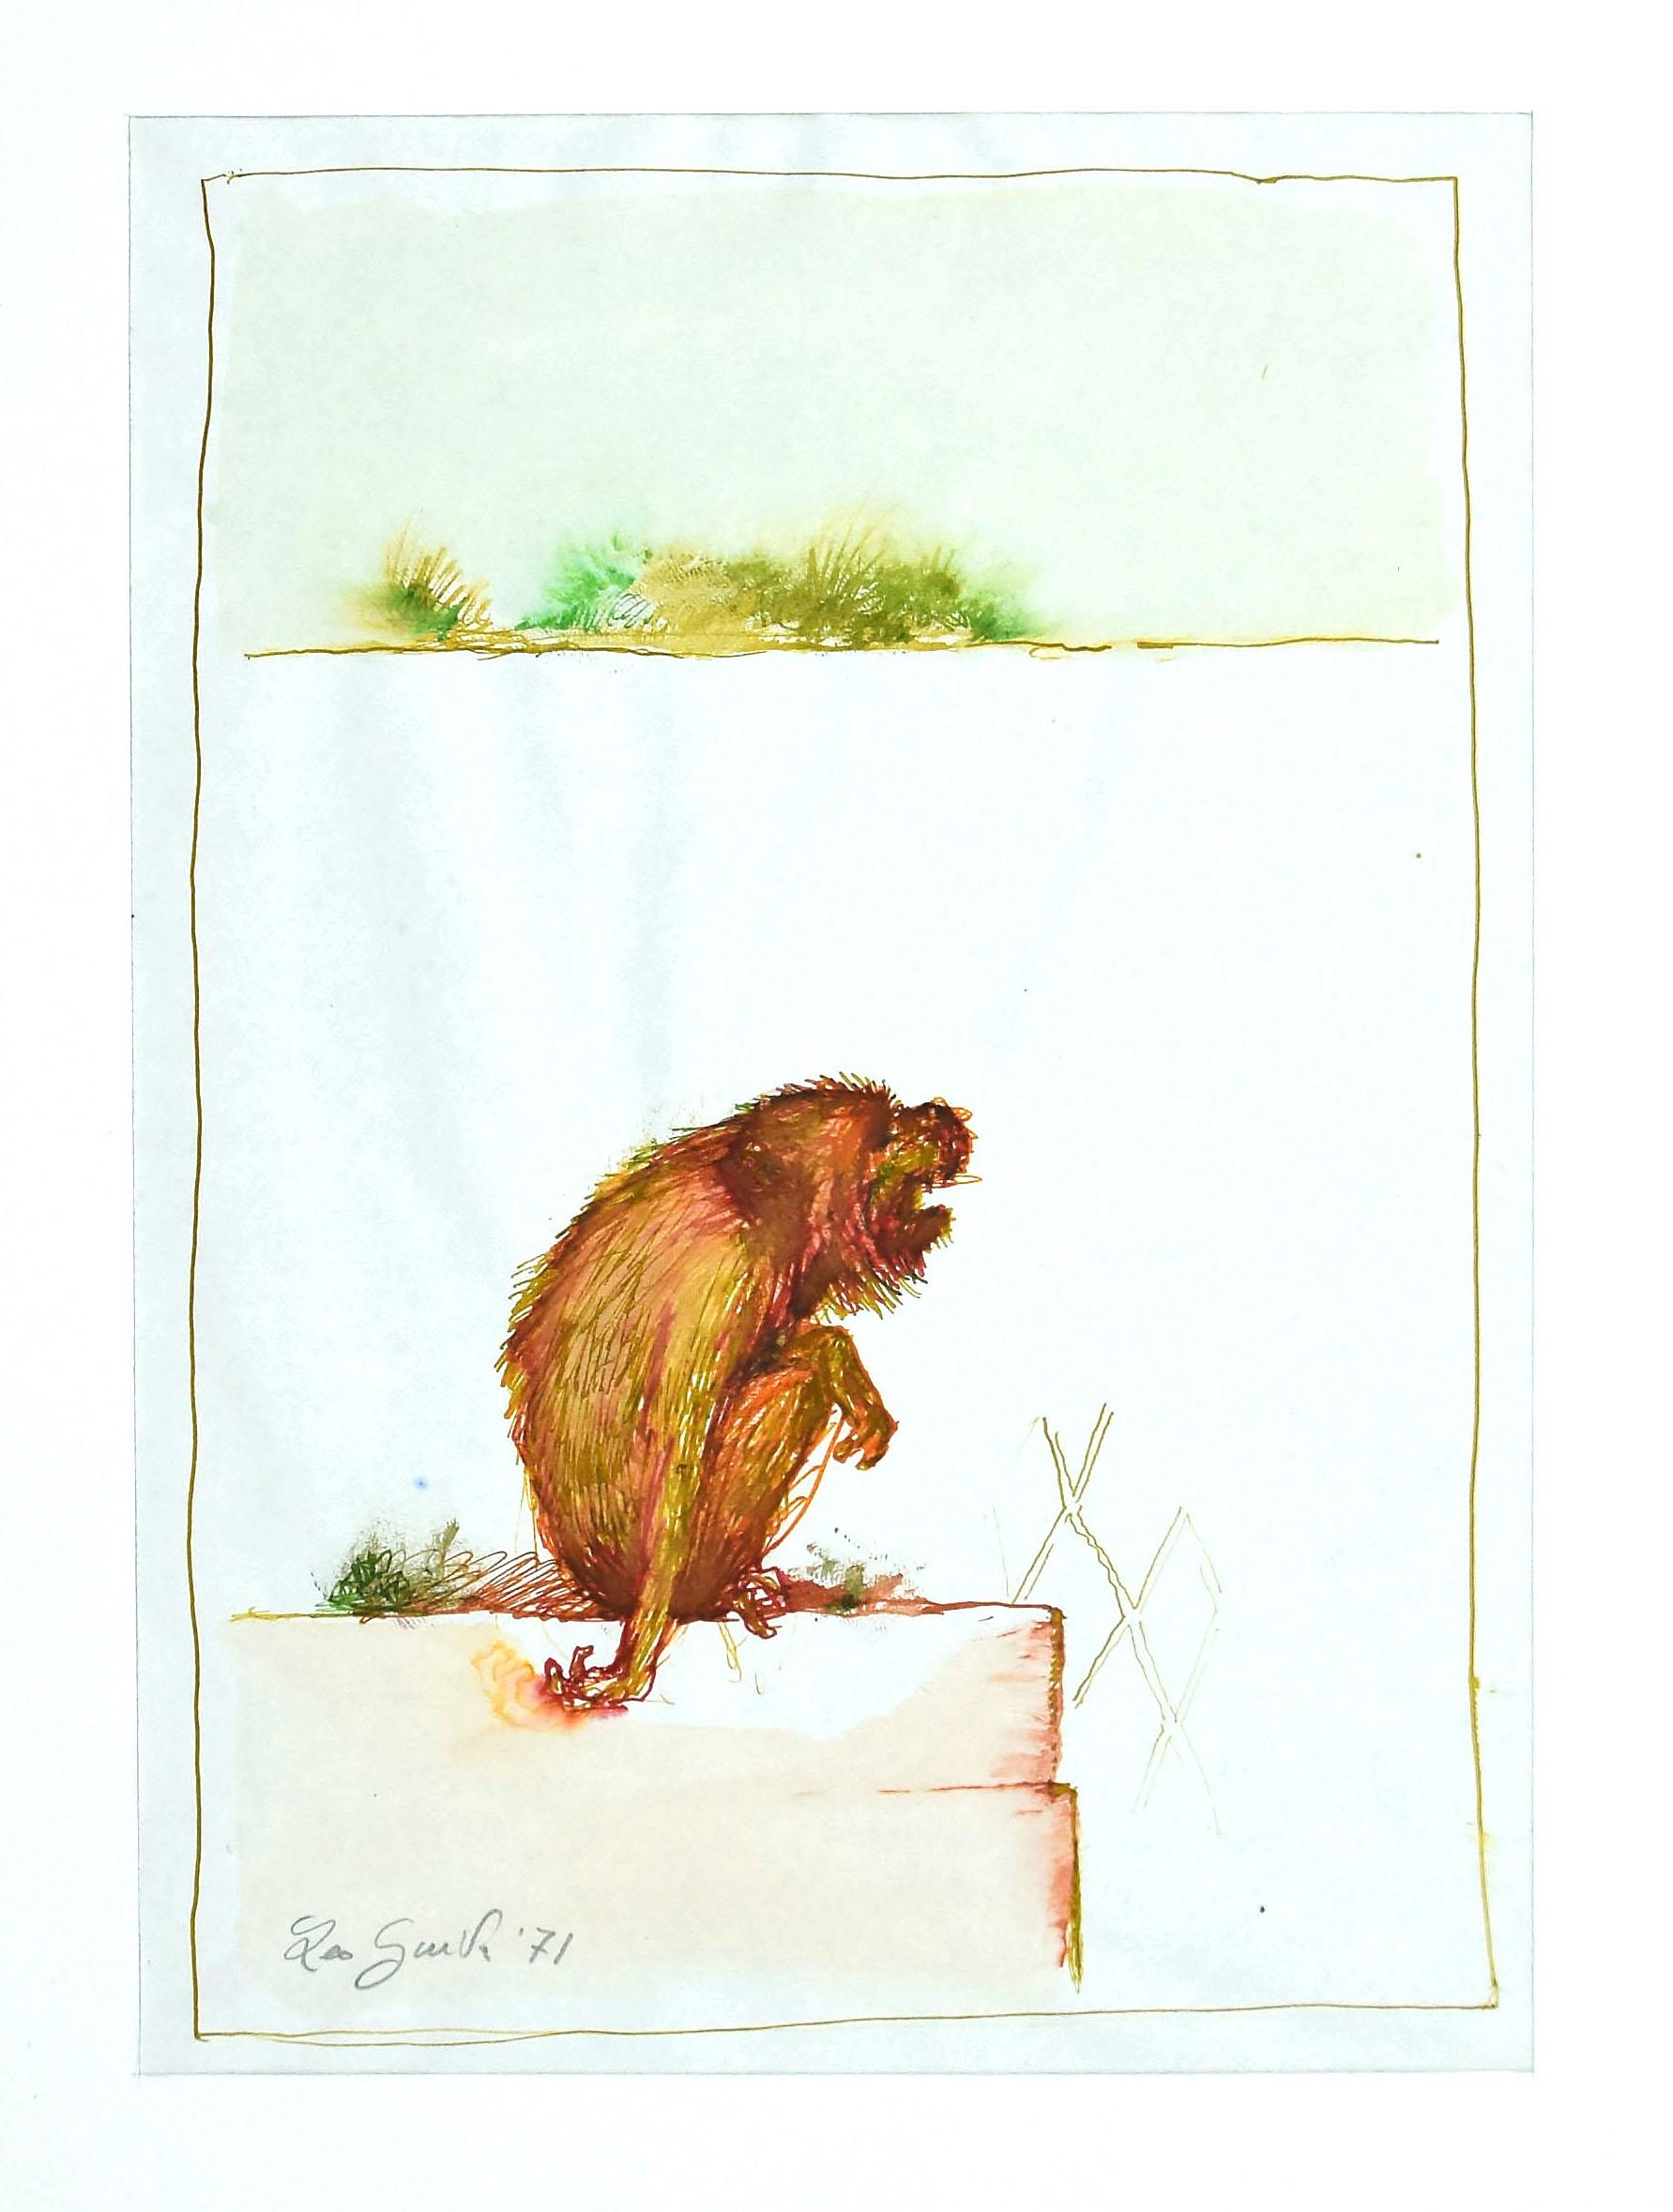 The Monkey - Ink and Watercolor by Leo Guida - 1971